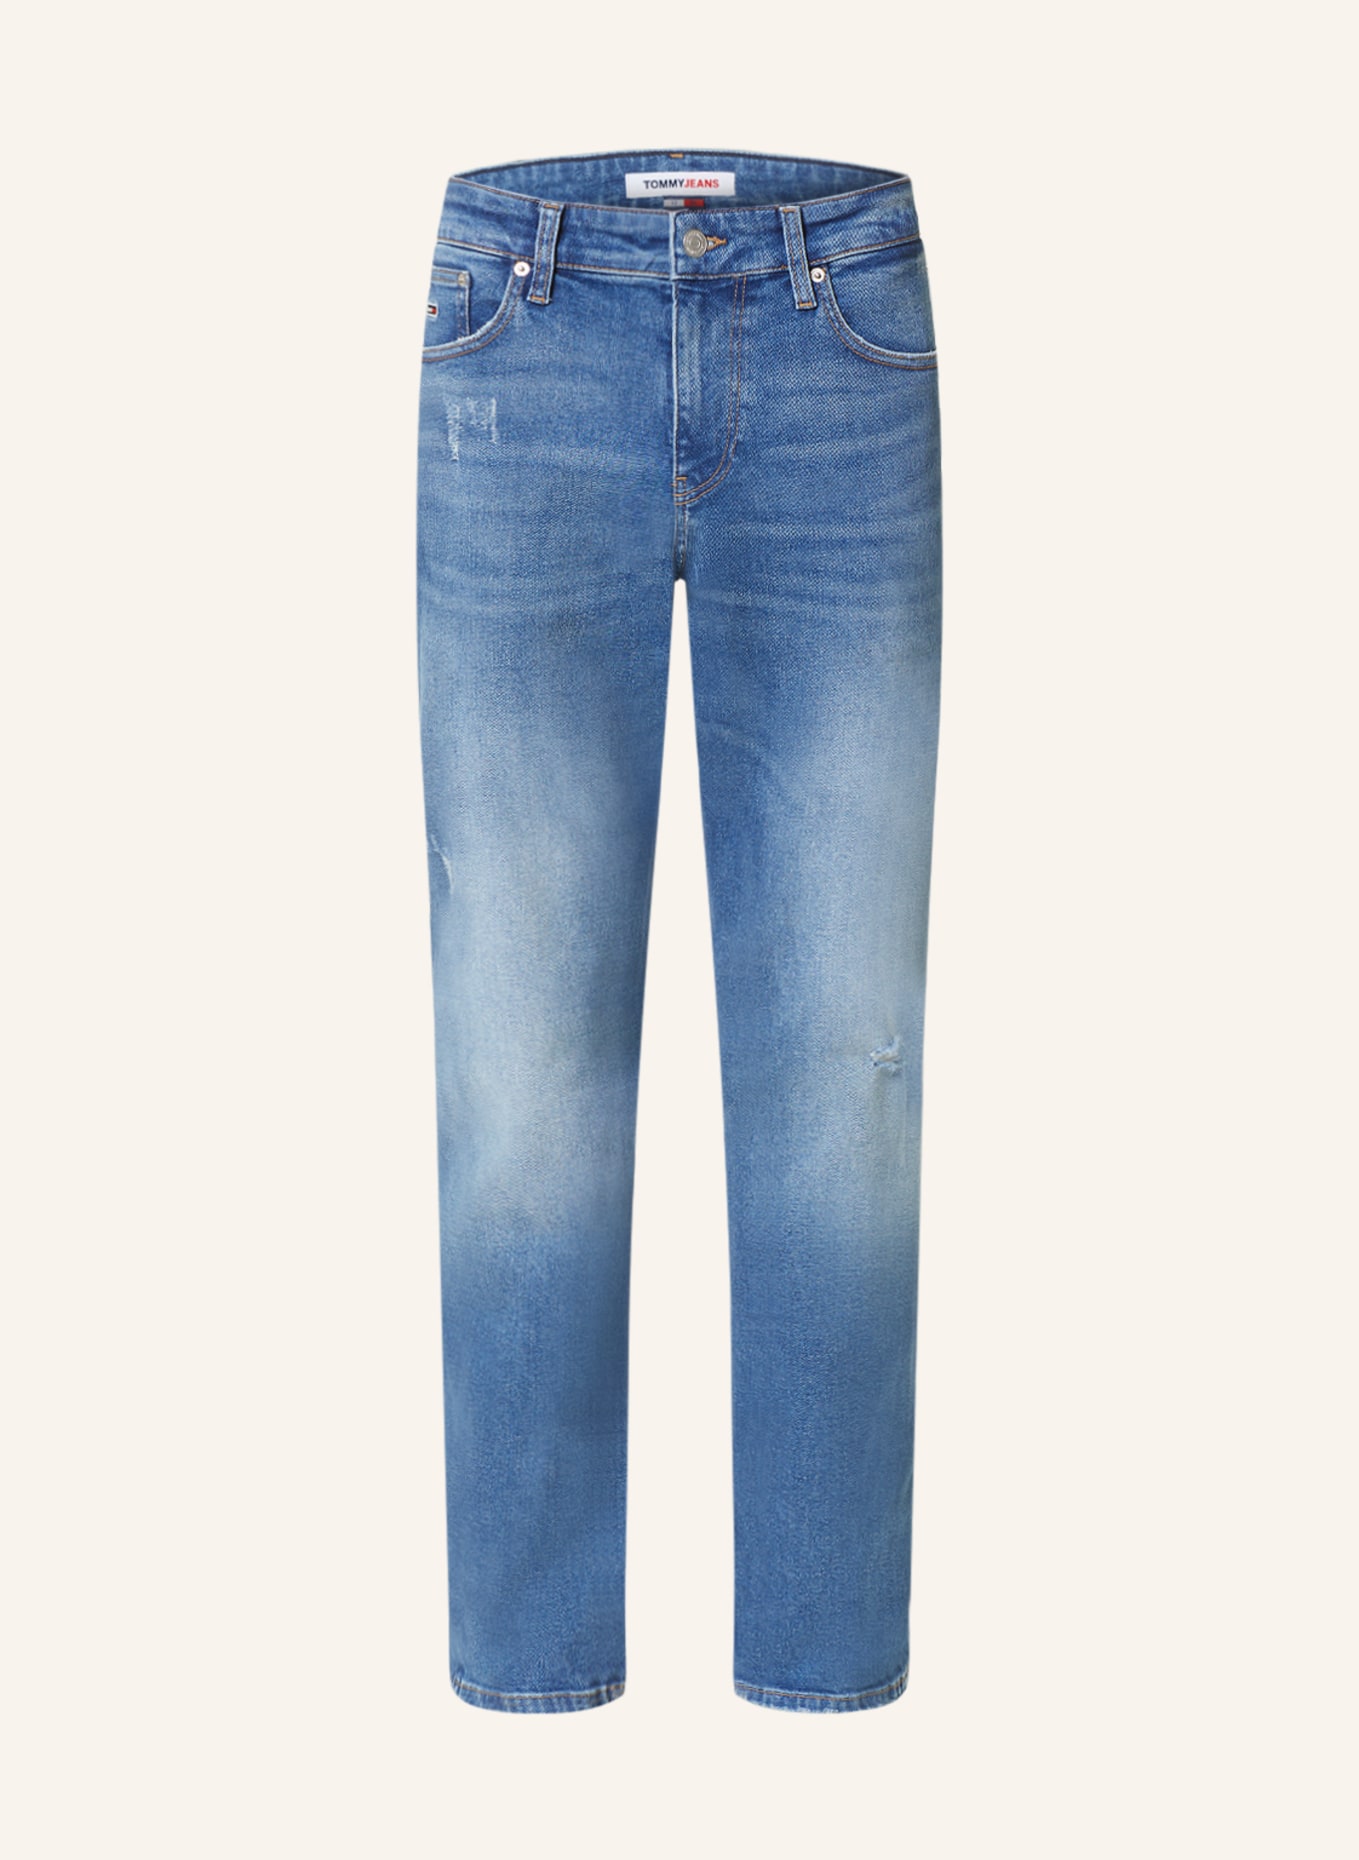 TOMMY JEANS Destroyed Jeans RYAN Straight Fit, Farbe: 1AB Denim Light (Bild 1)